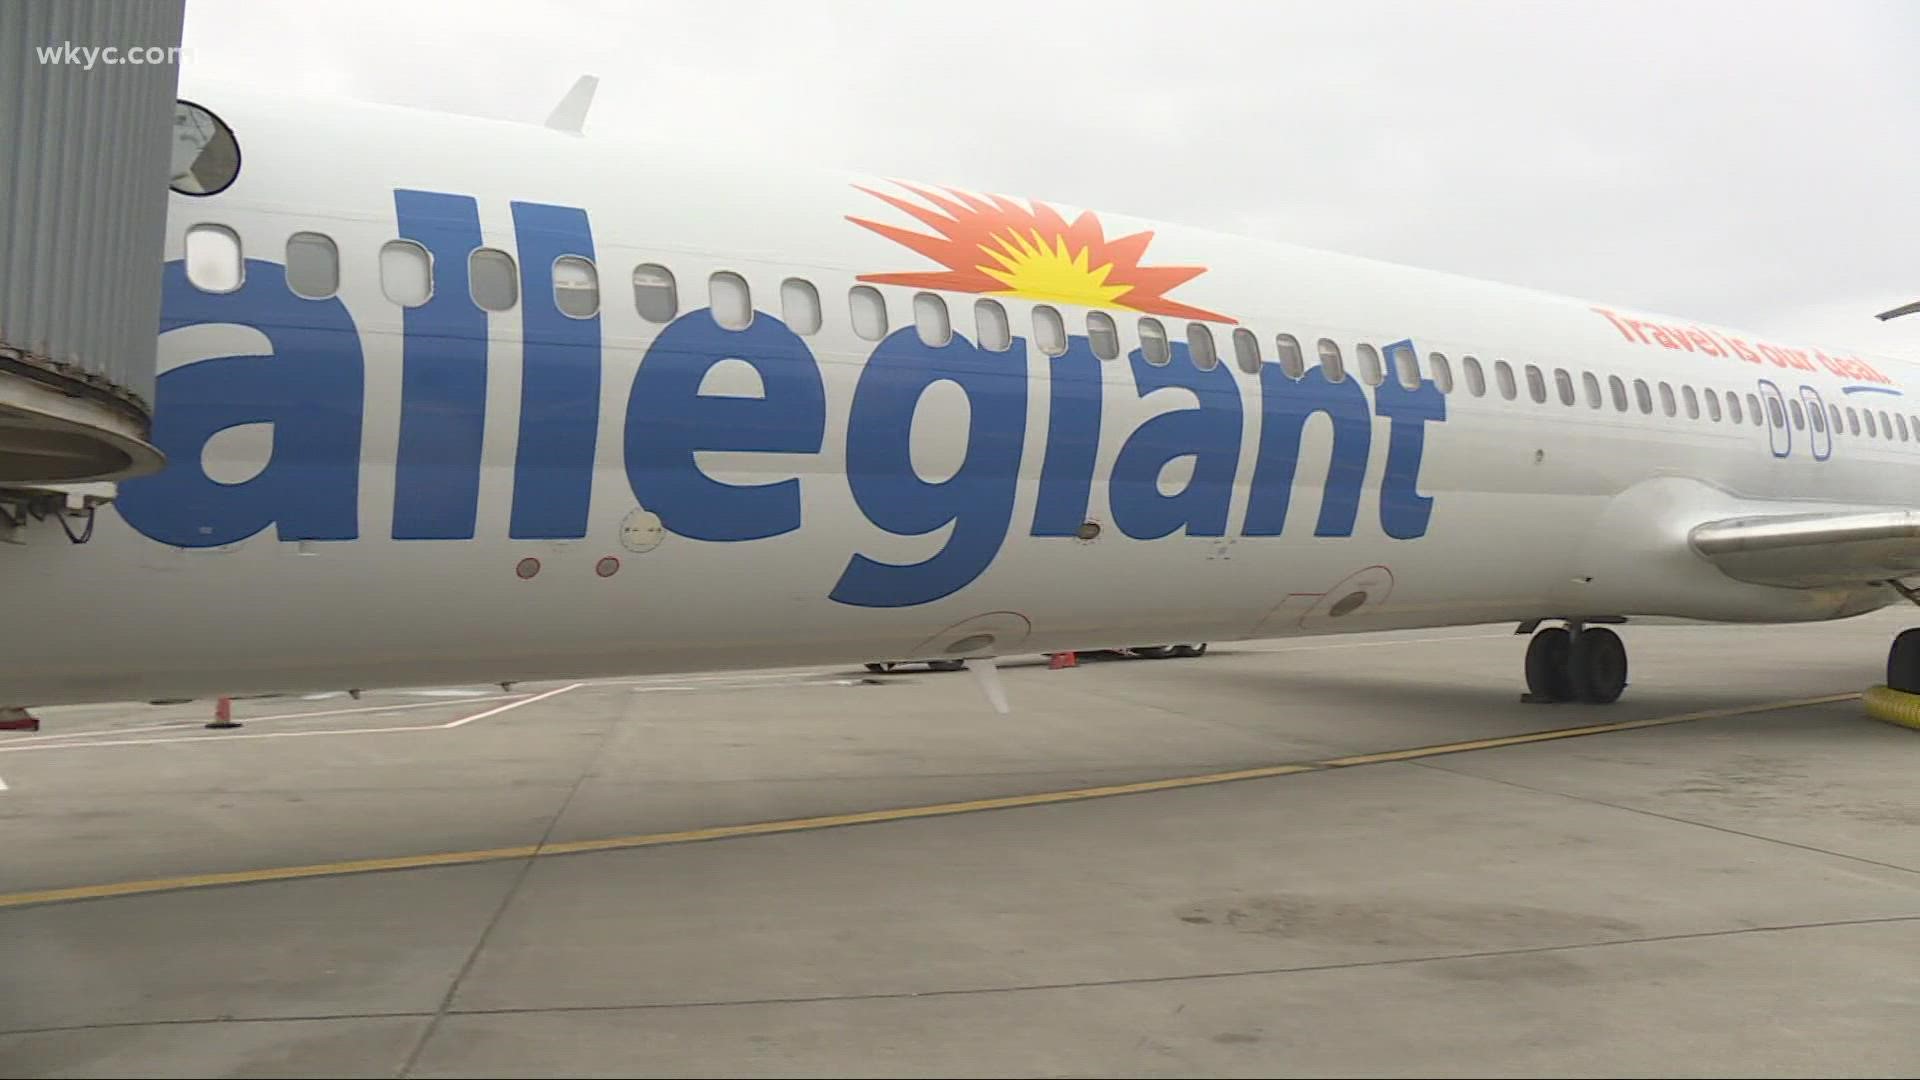 One-way fares on new routes from CAK to Hilton Head and three Florida destinations will cost as low as $59. Allegiant will wrap up service in Cleveland in January.